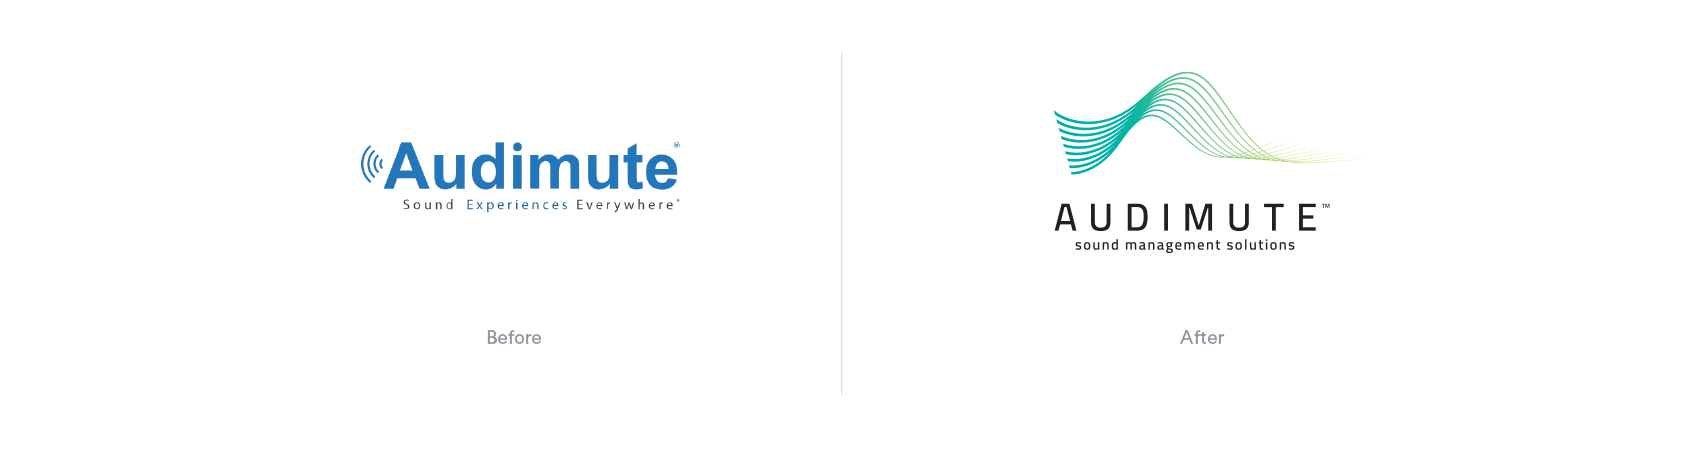 logo, before and after